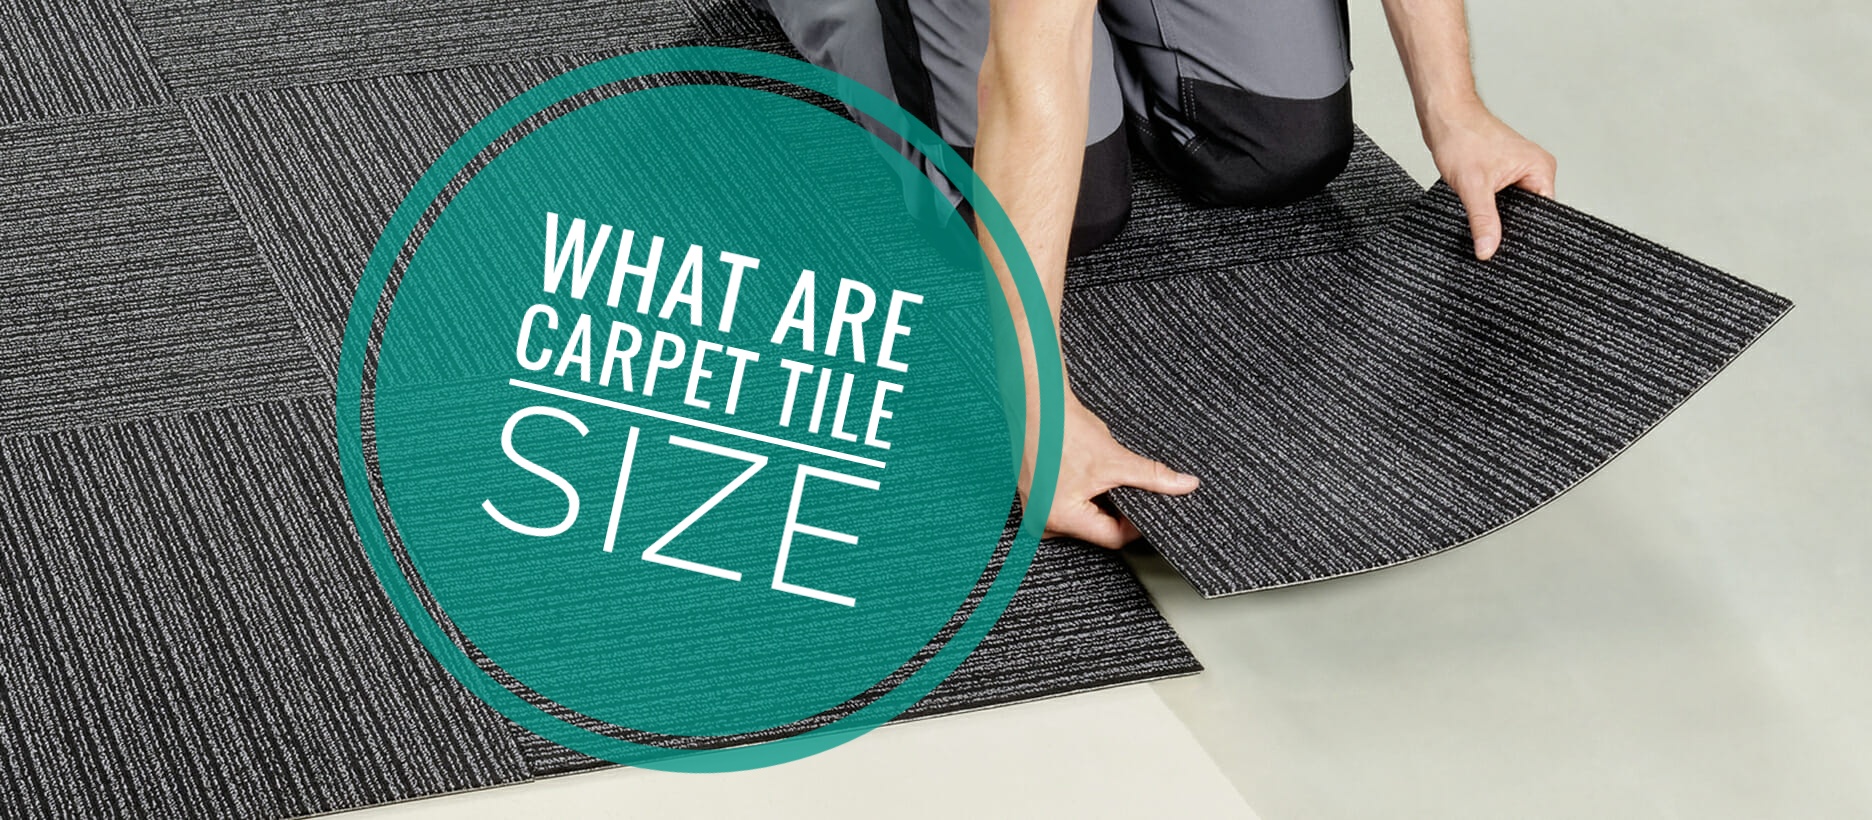 what are carpet tile size.jpg